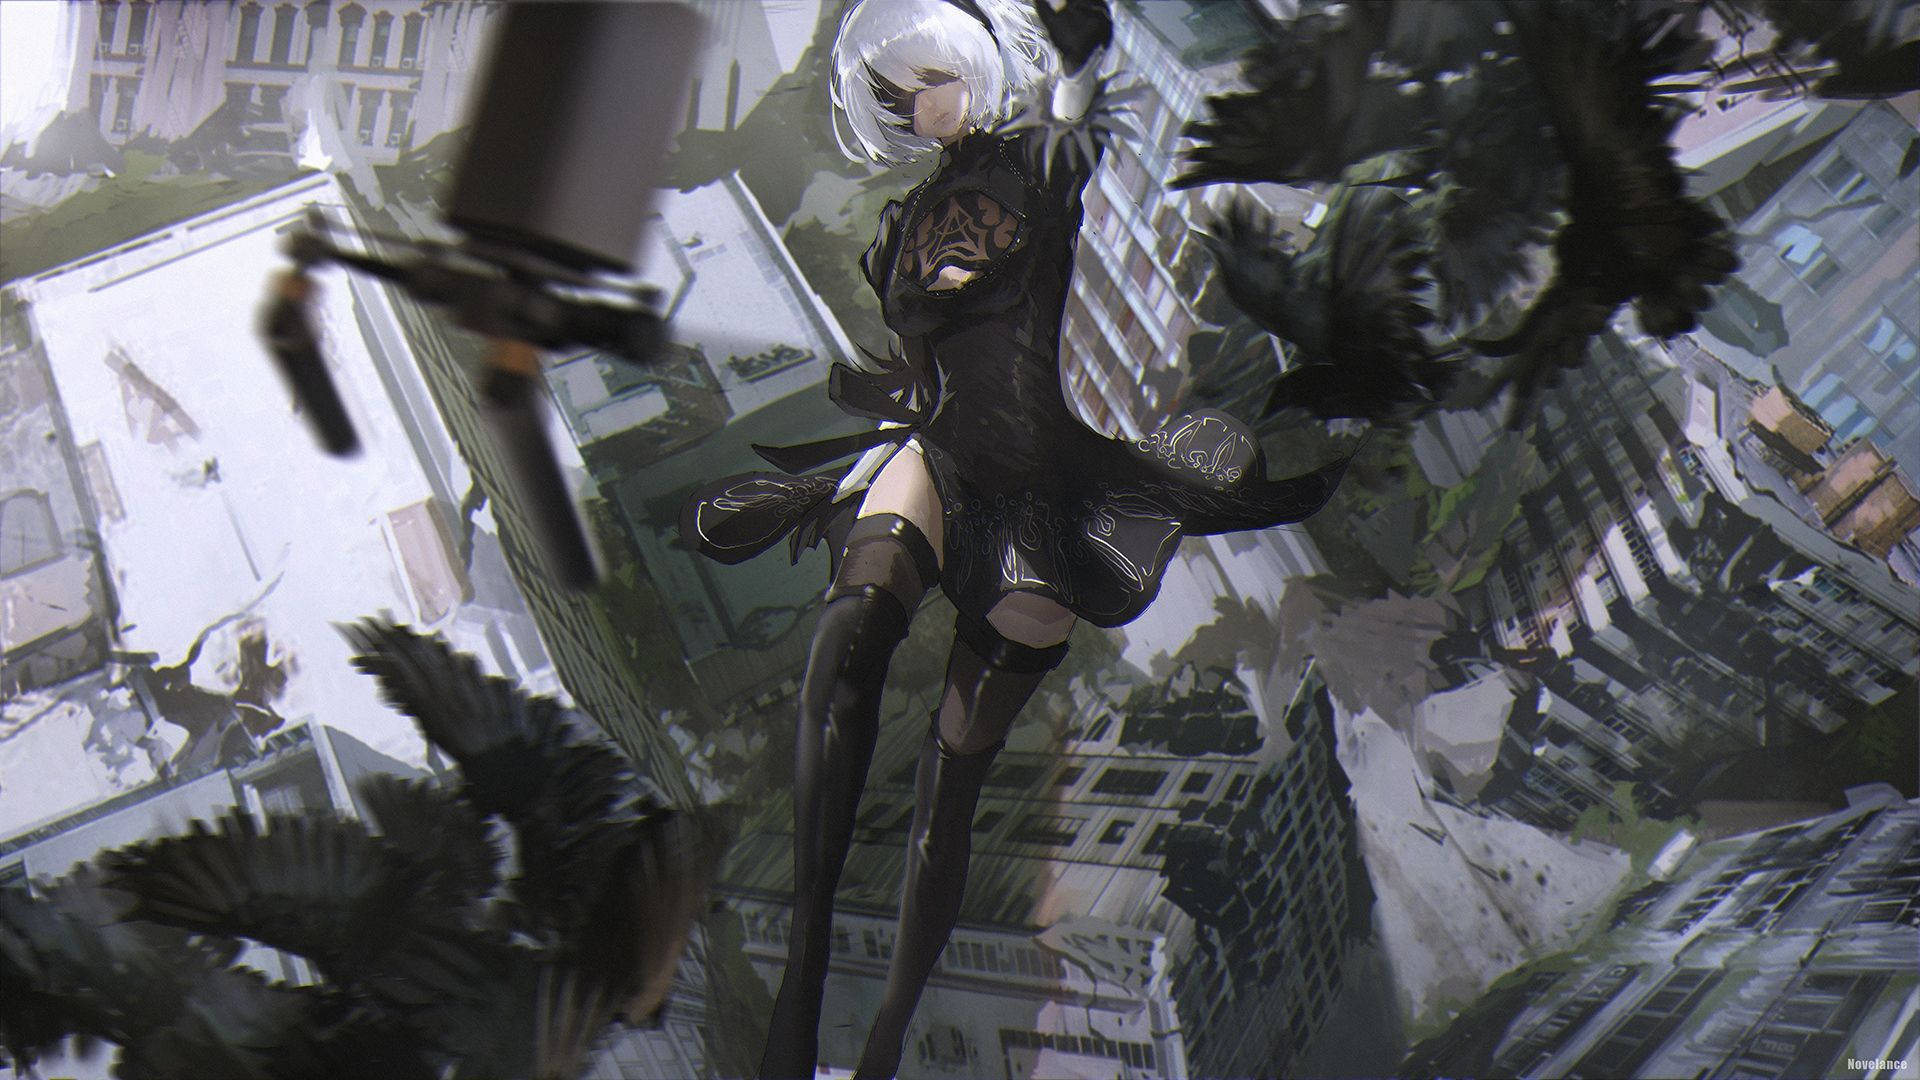 2B from Nier Automata takes a brave and daring leap Wallpaper